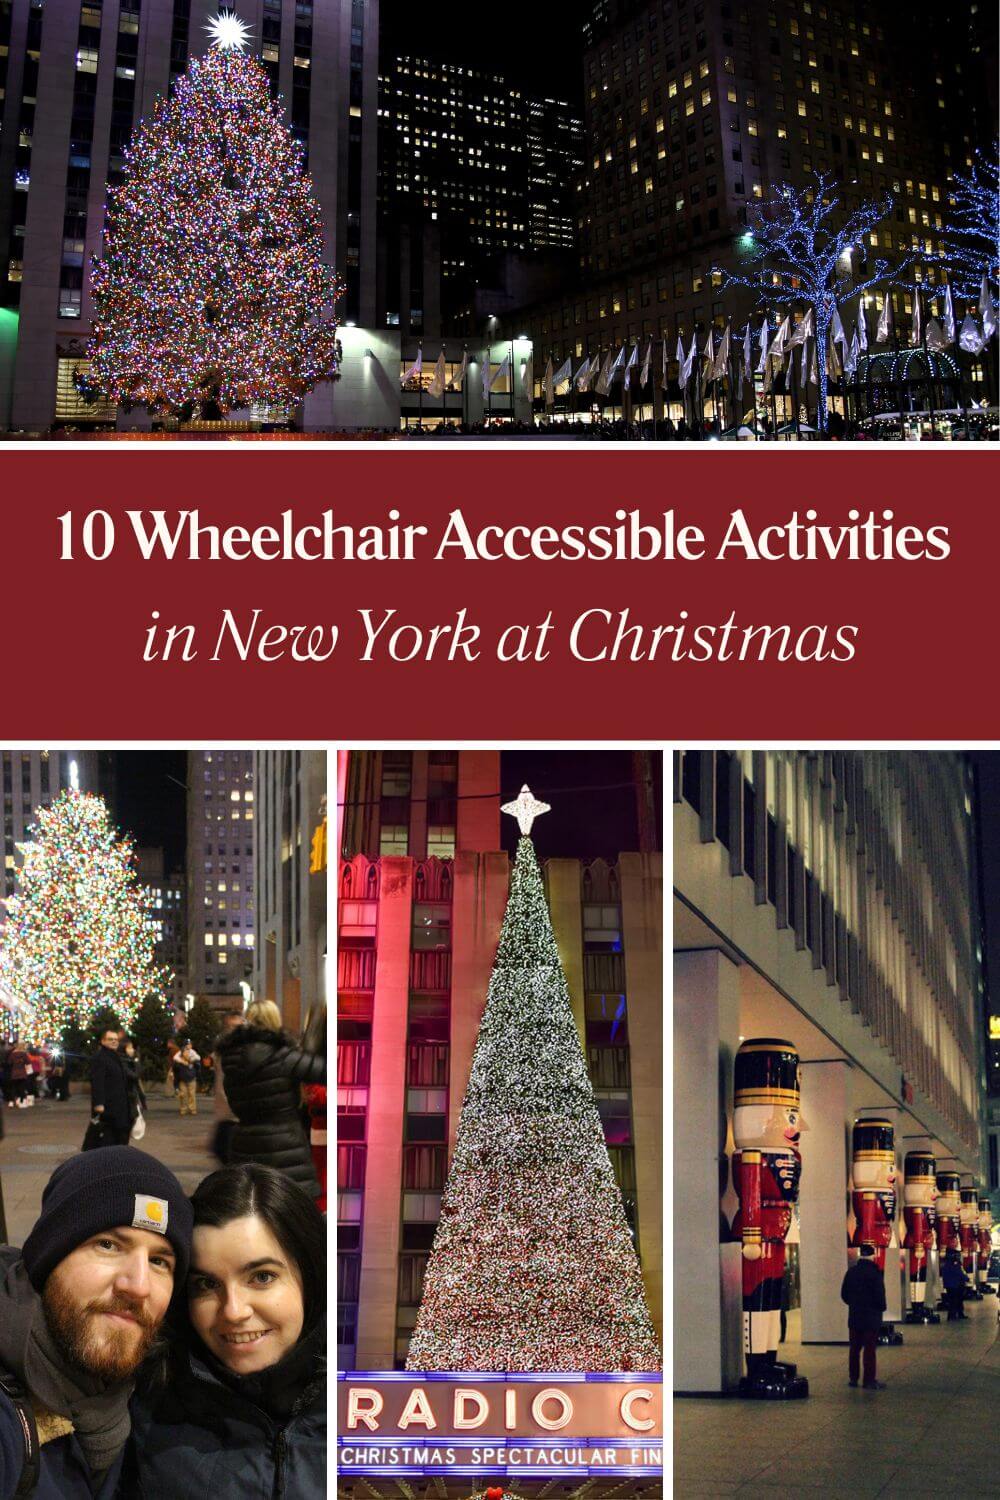 Pinterest image showing a collage of New York photos. Text across image reads "10 Wheelchair Accessible Activities in New York at Christmas"